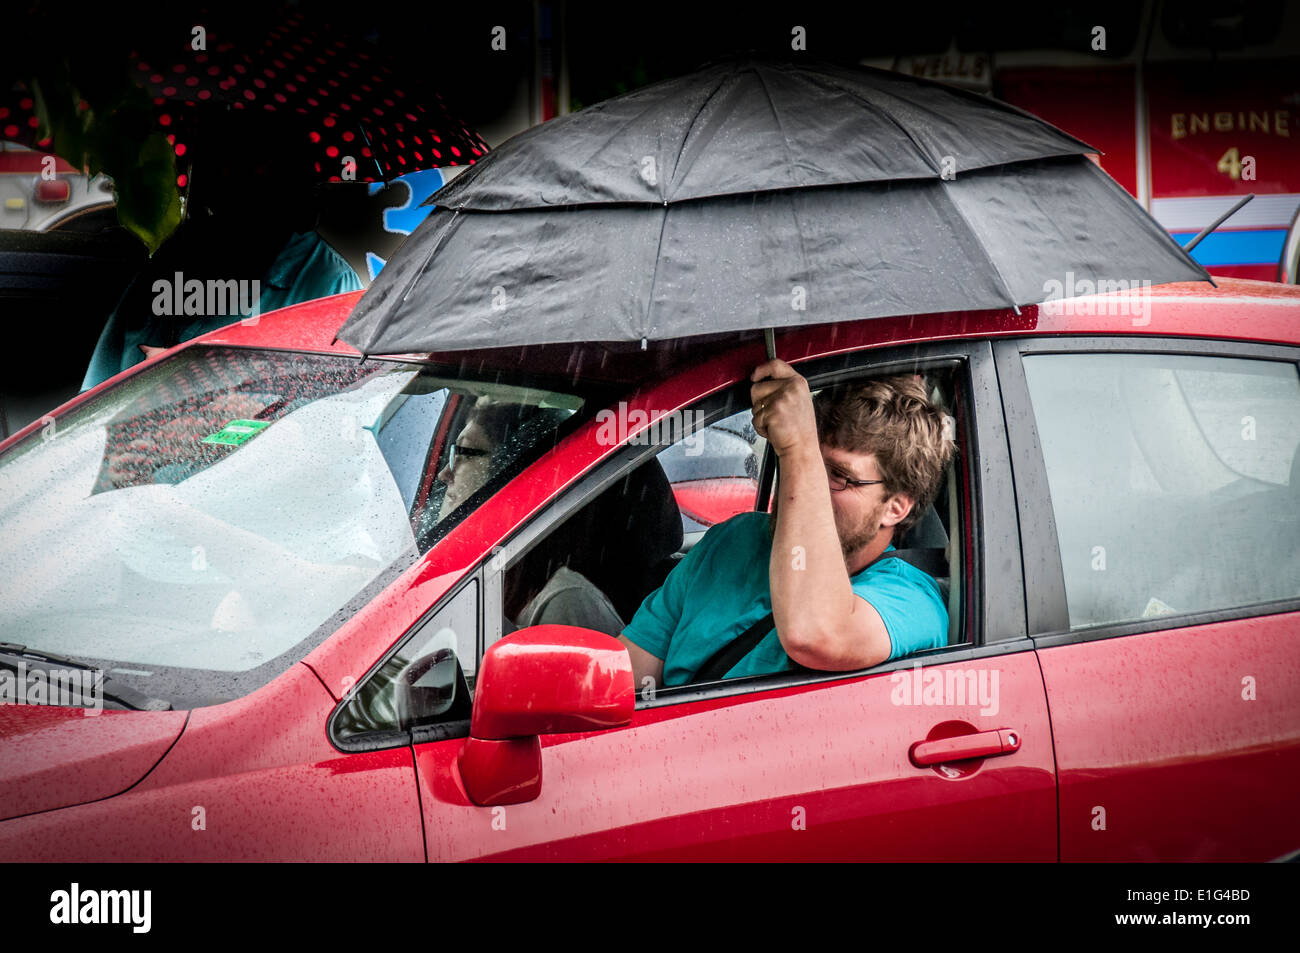 Keeping dry, this man while watching a parade in a rain storm rolled down his window , put up an umbrella better hear the music. Stock Photo